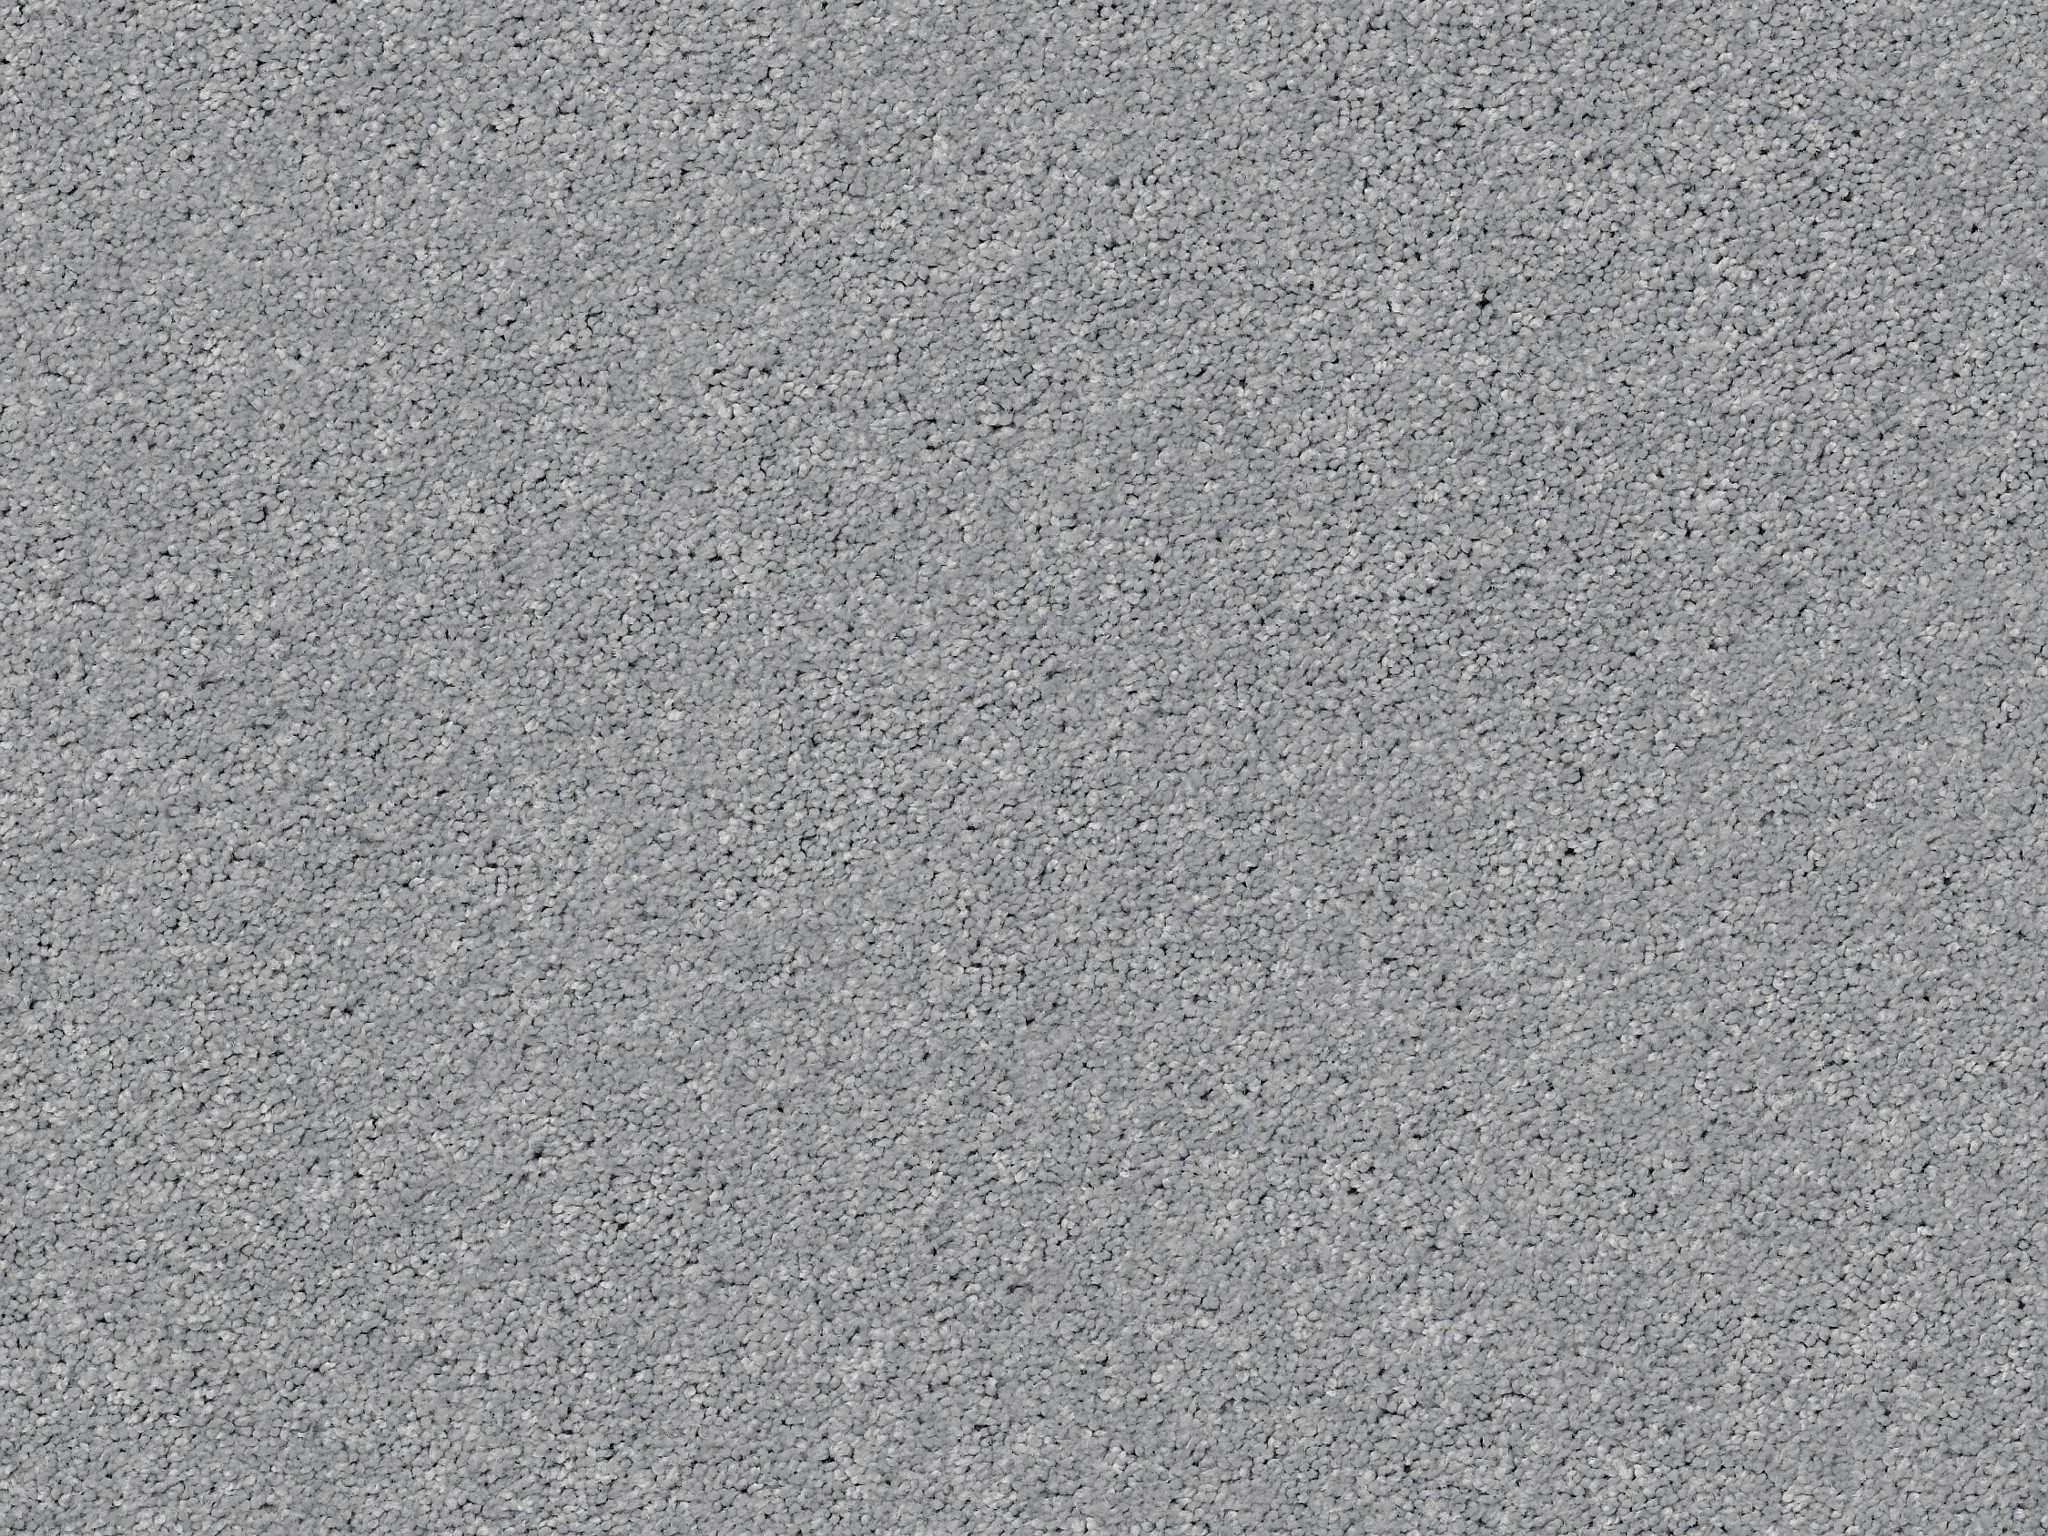 First Act Carpet - Edgewater Zoomed Swatch Image